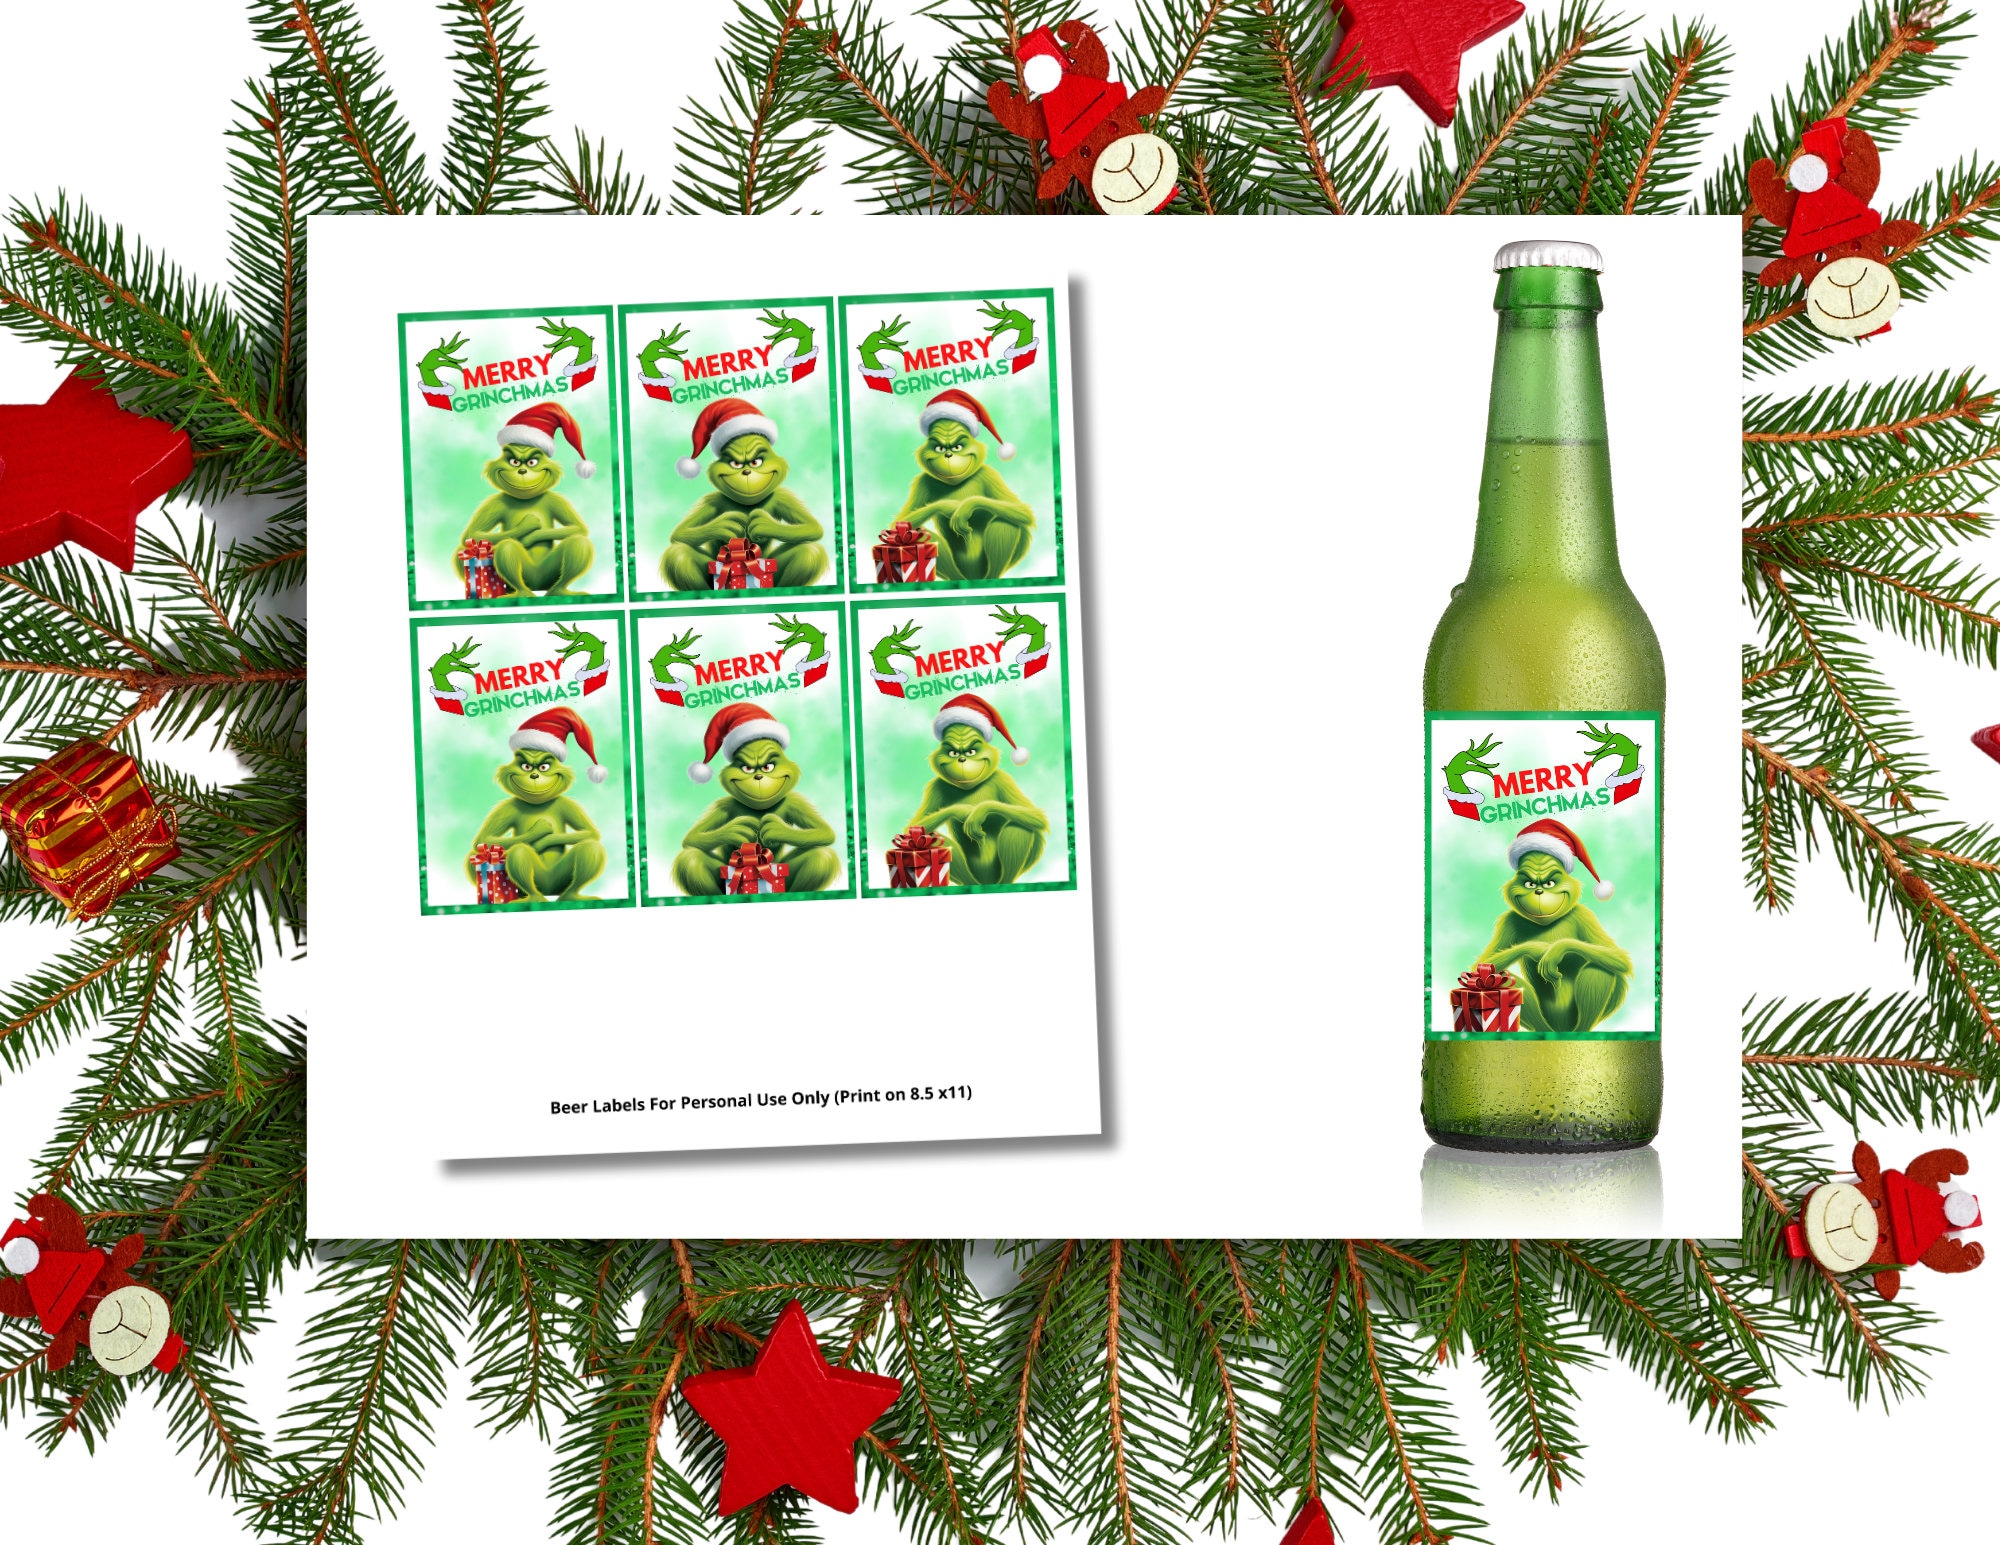 Grinch Christmas Decorations, 48Pcs Christmas Wine Bottle Label Stickers,  Grinch Party Decor Supplies, Funny Waterproof Wine Bottle Cover, Novelty